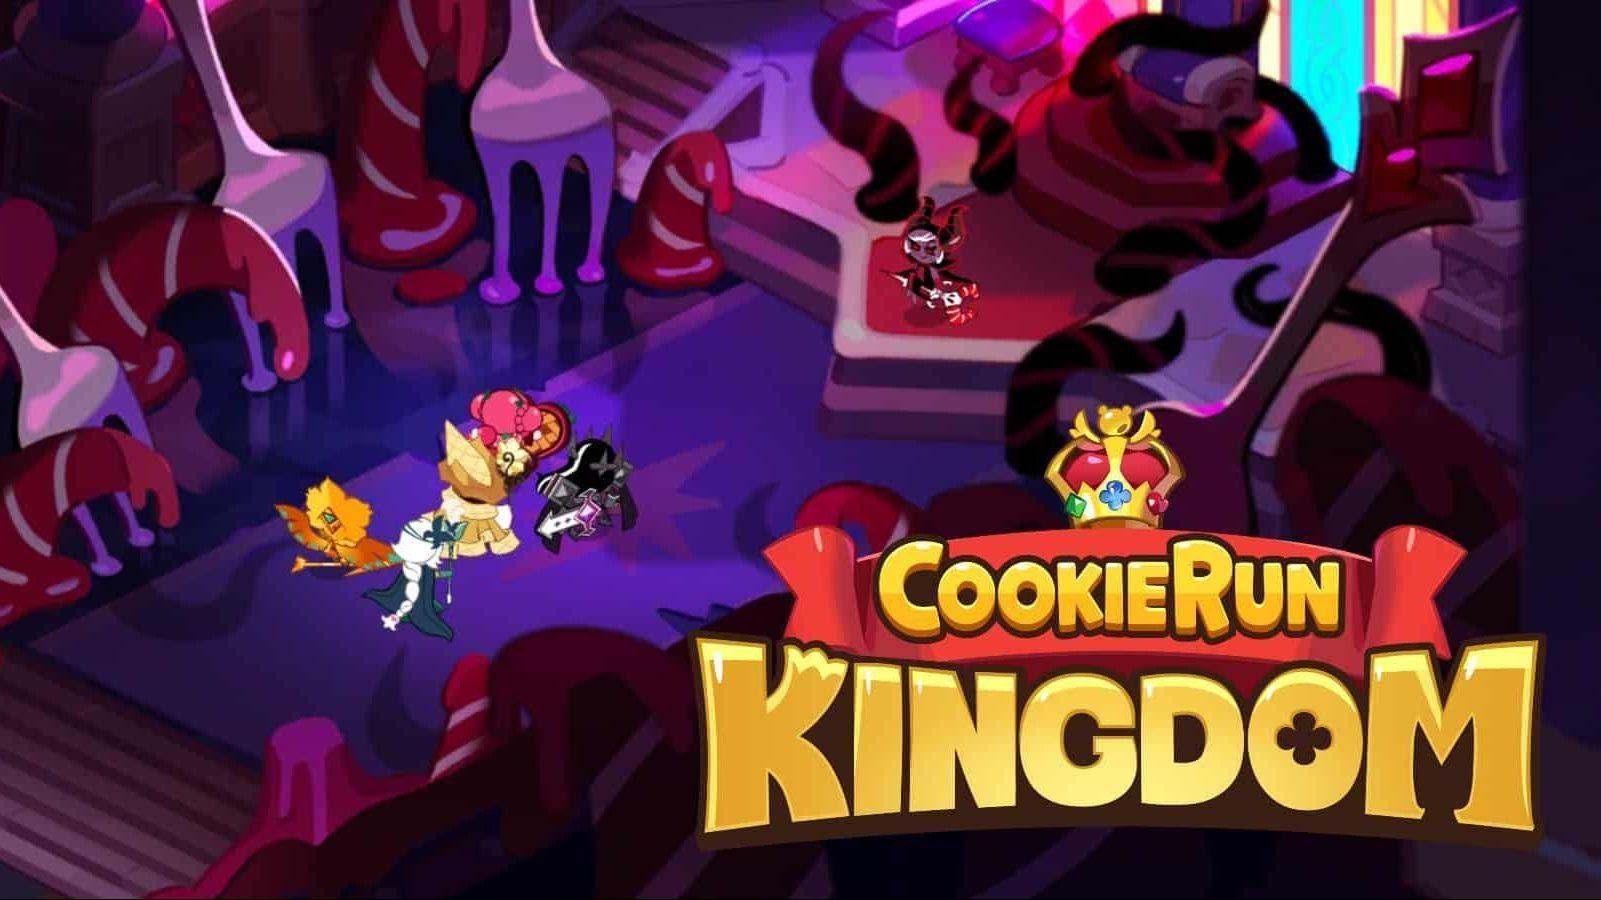 An image of the Cookie Run Kingdom logo with characters